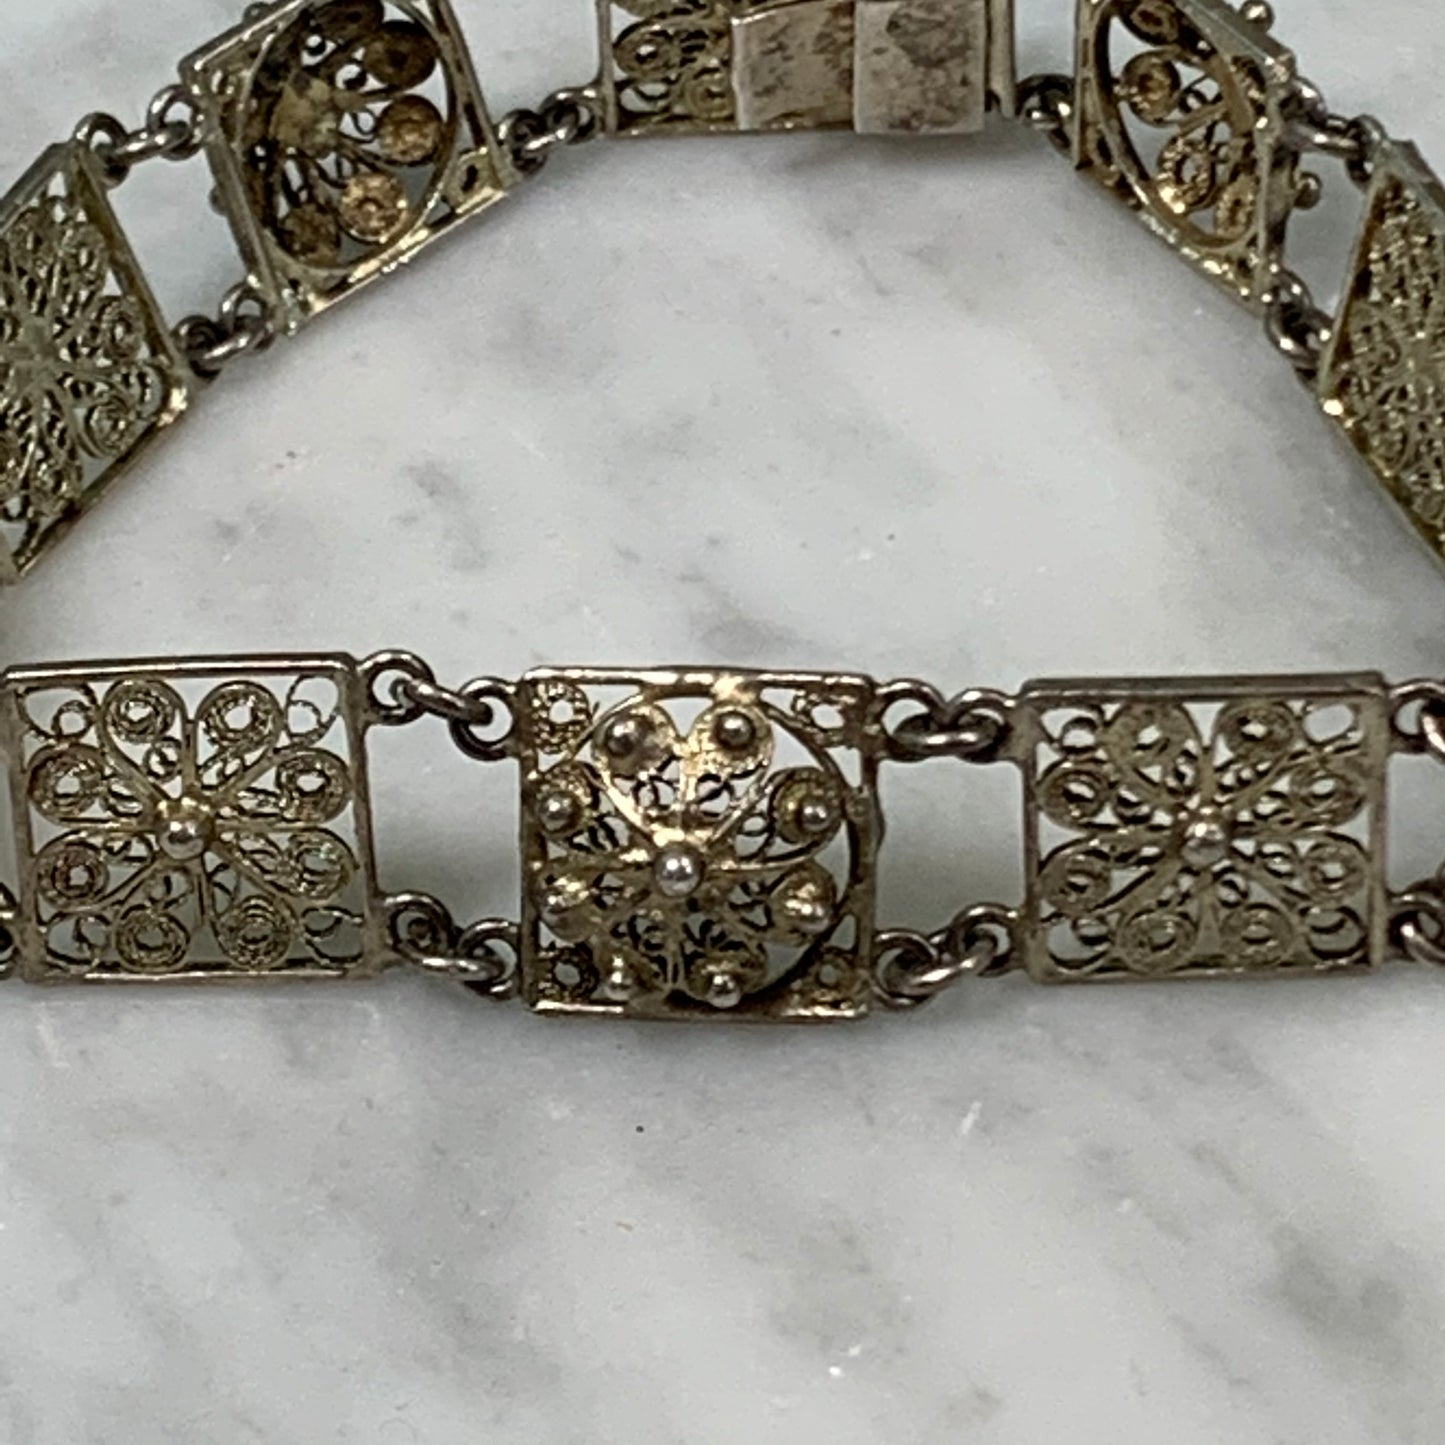 This bracelet was made in the 1940's!!!